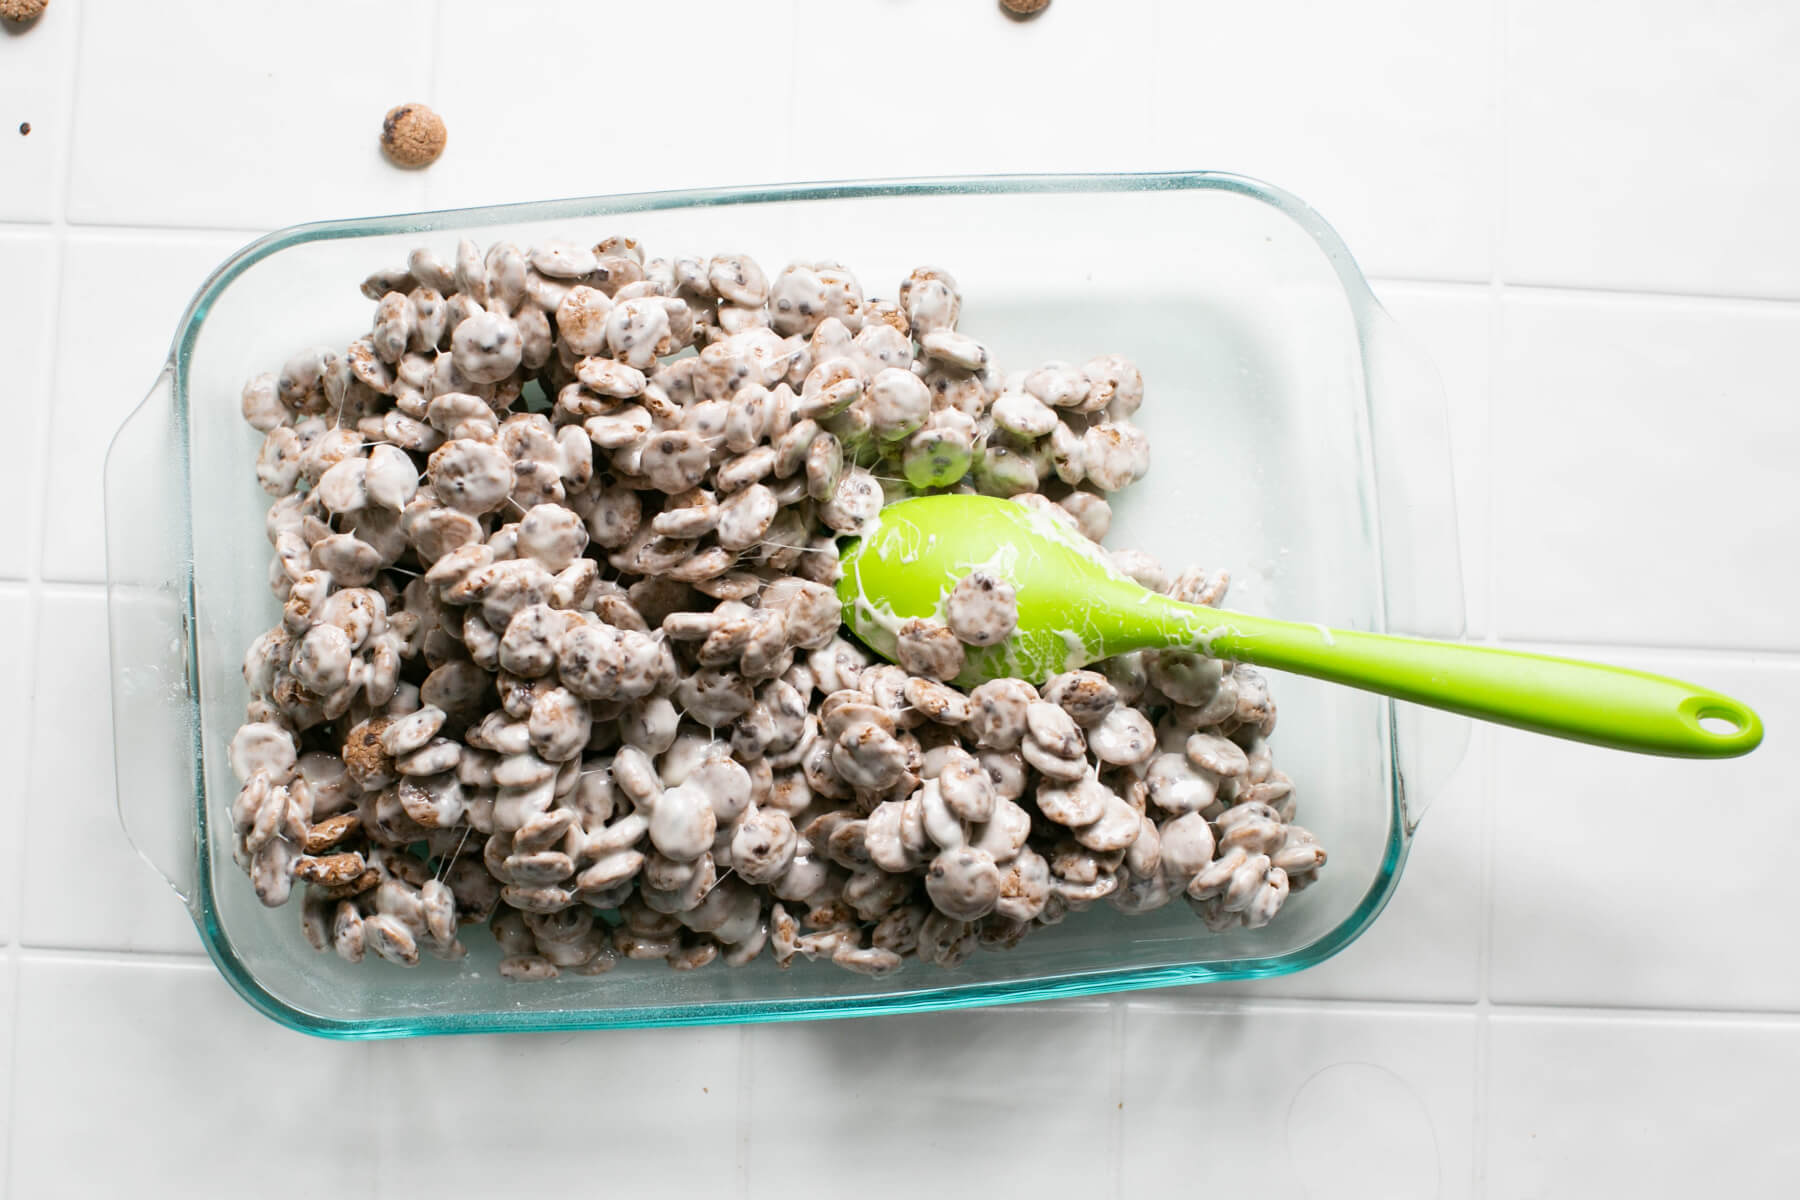 spread the cookie crisp treats into the baking pan